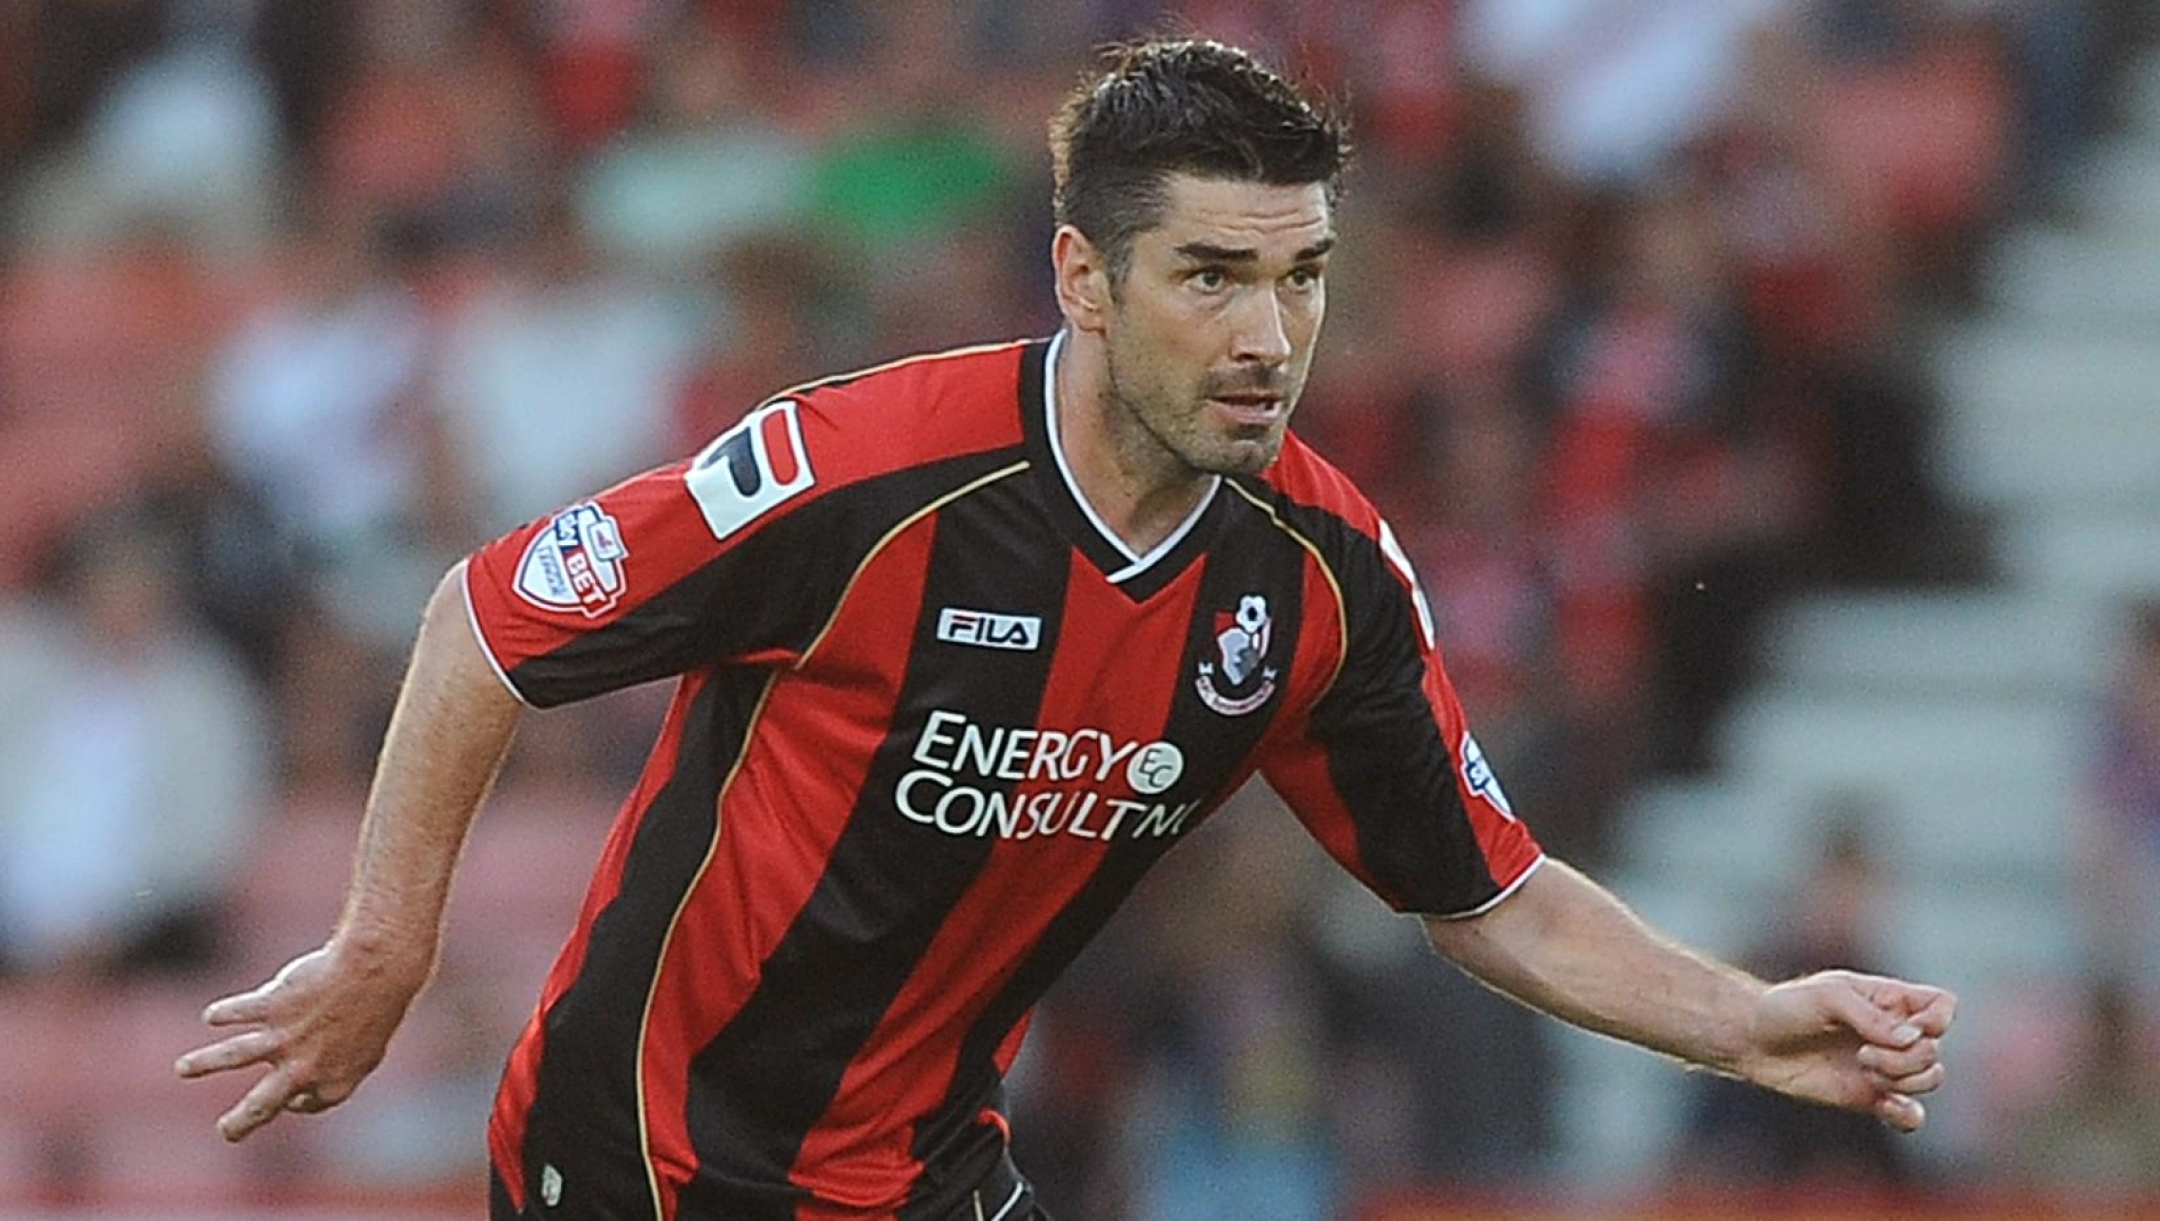 BOURNEMOUTH, ENGLAND - AUGUST 06: Richard Hughes of Bournemouth attacks during the Capital One Cup First Round match between AFC Bournemouth and Portsmouth at The Goldsands Stadium on August 06, 2013 in Bournemouth, England, (Photo by Charlie Crowhurst/Getty Images) *** Local Caption *** Richard Hughes